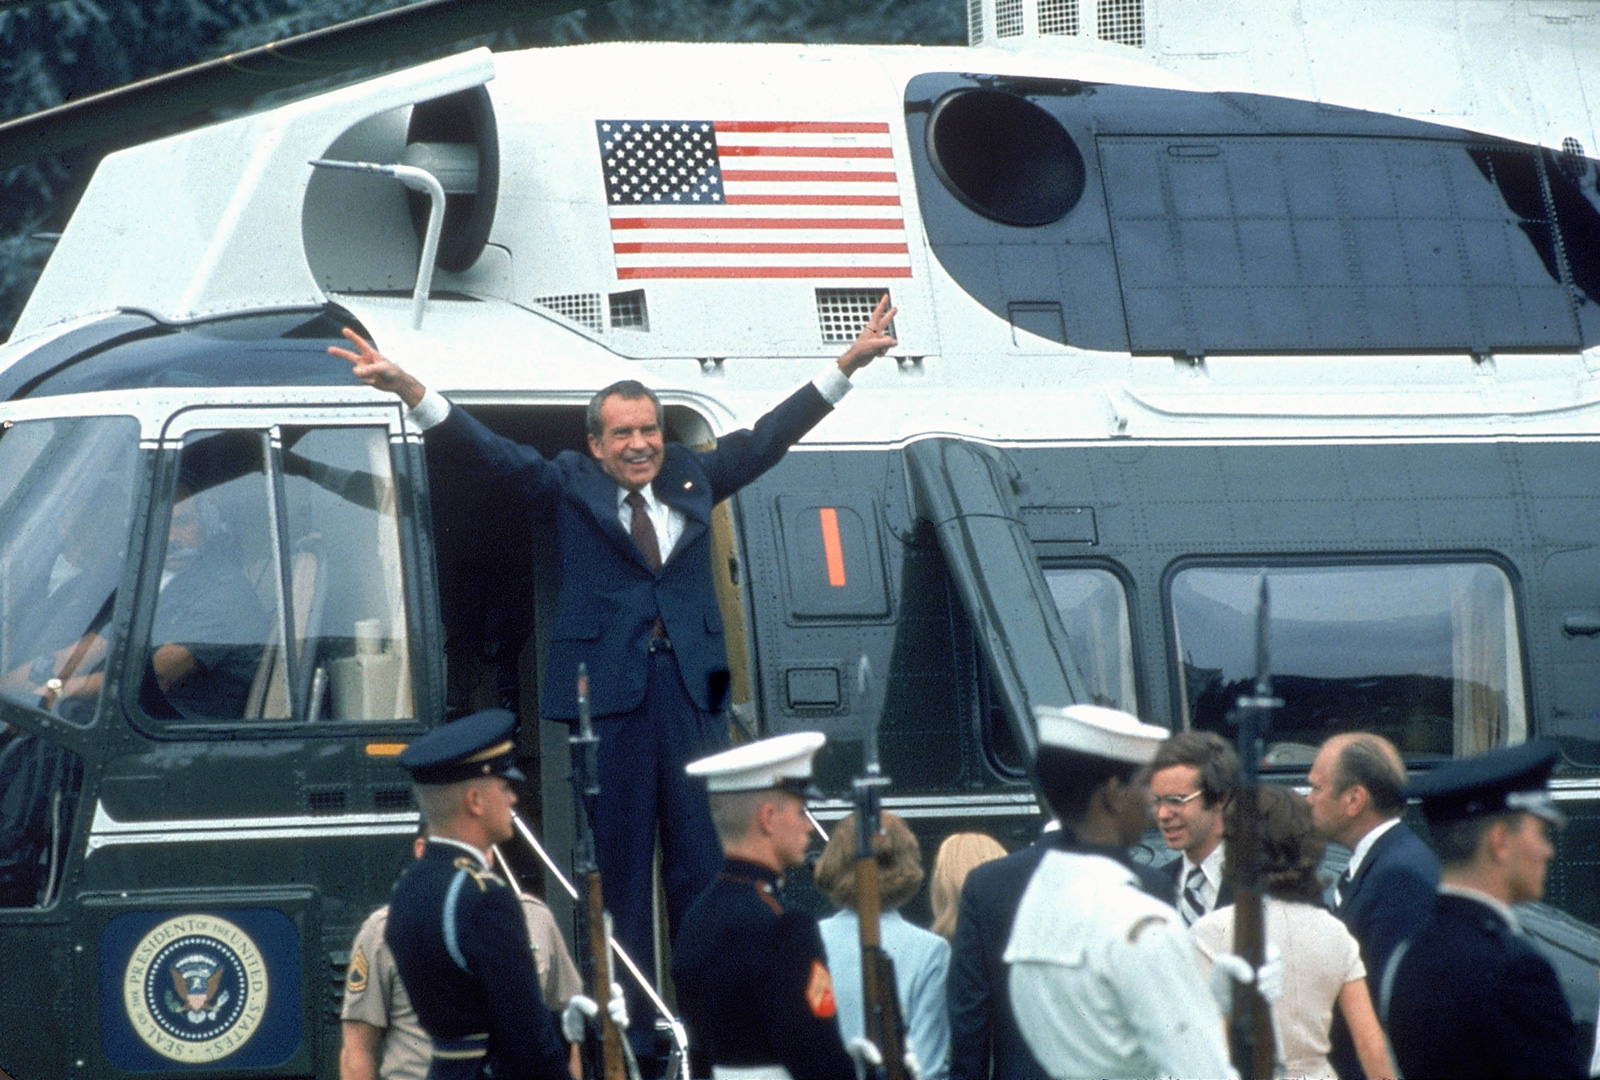 Richard Nixon leaving the White House following his resignation, August 9, 1974